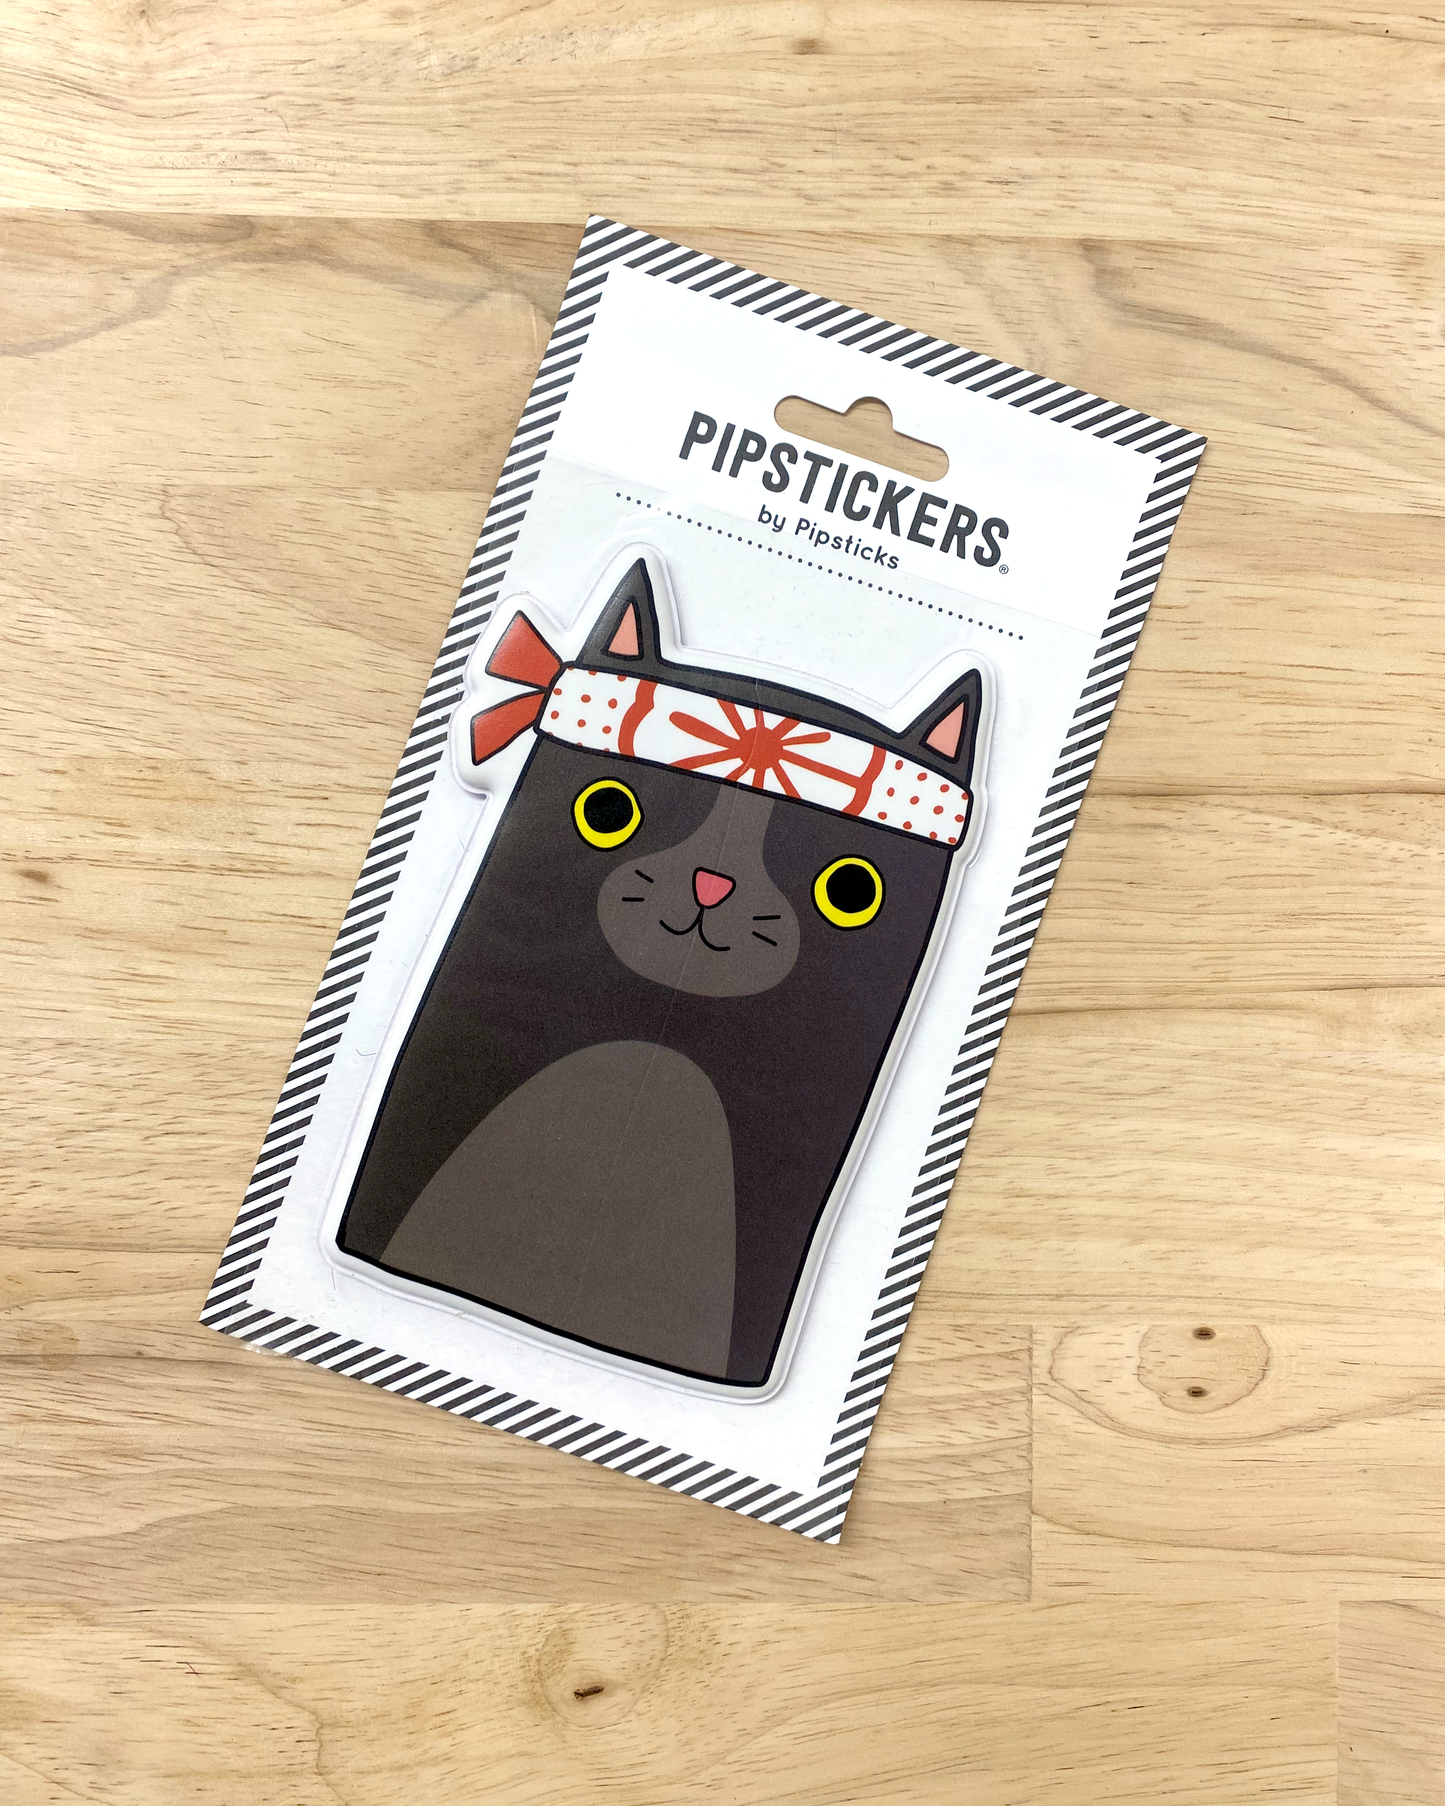 Pip Stickers